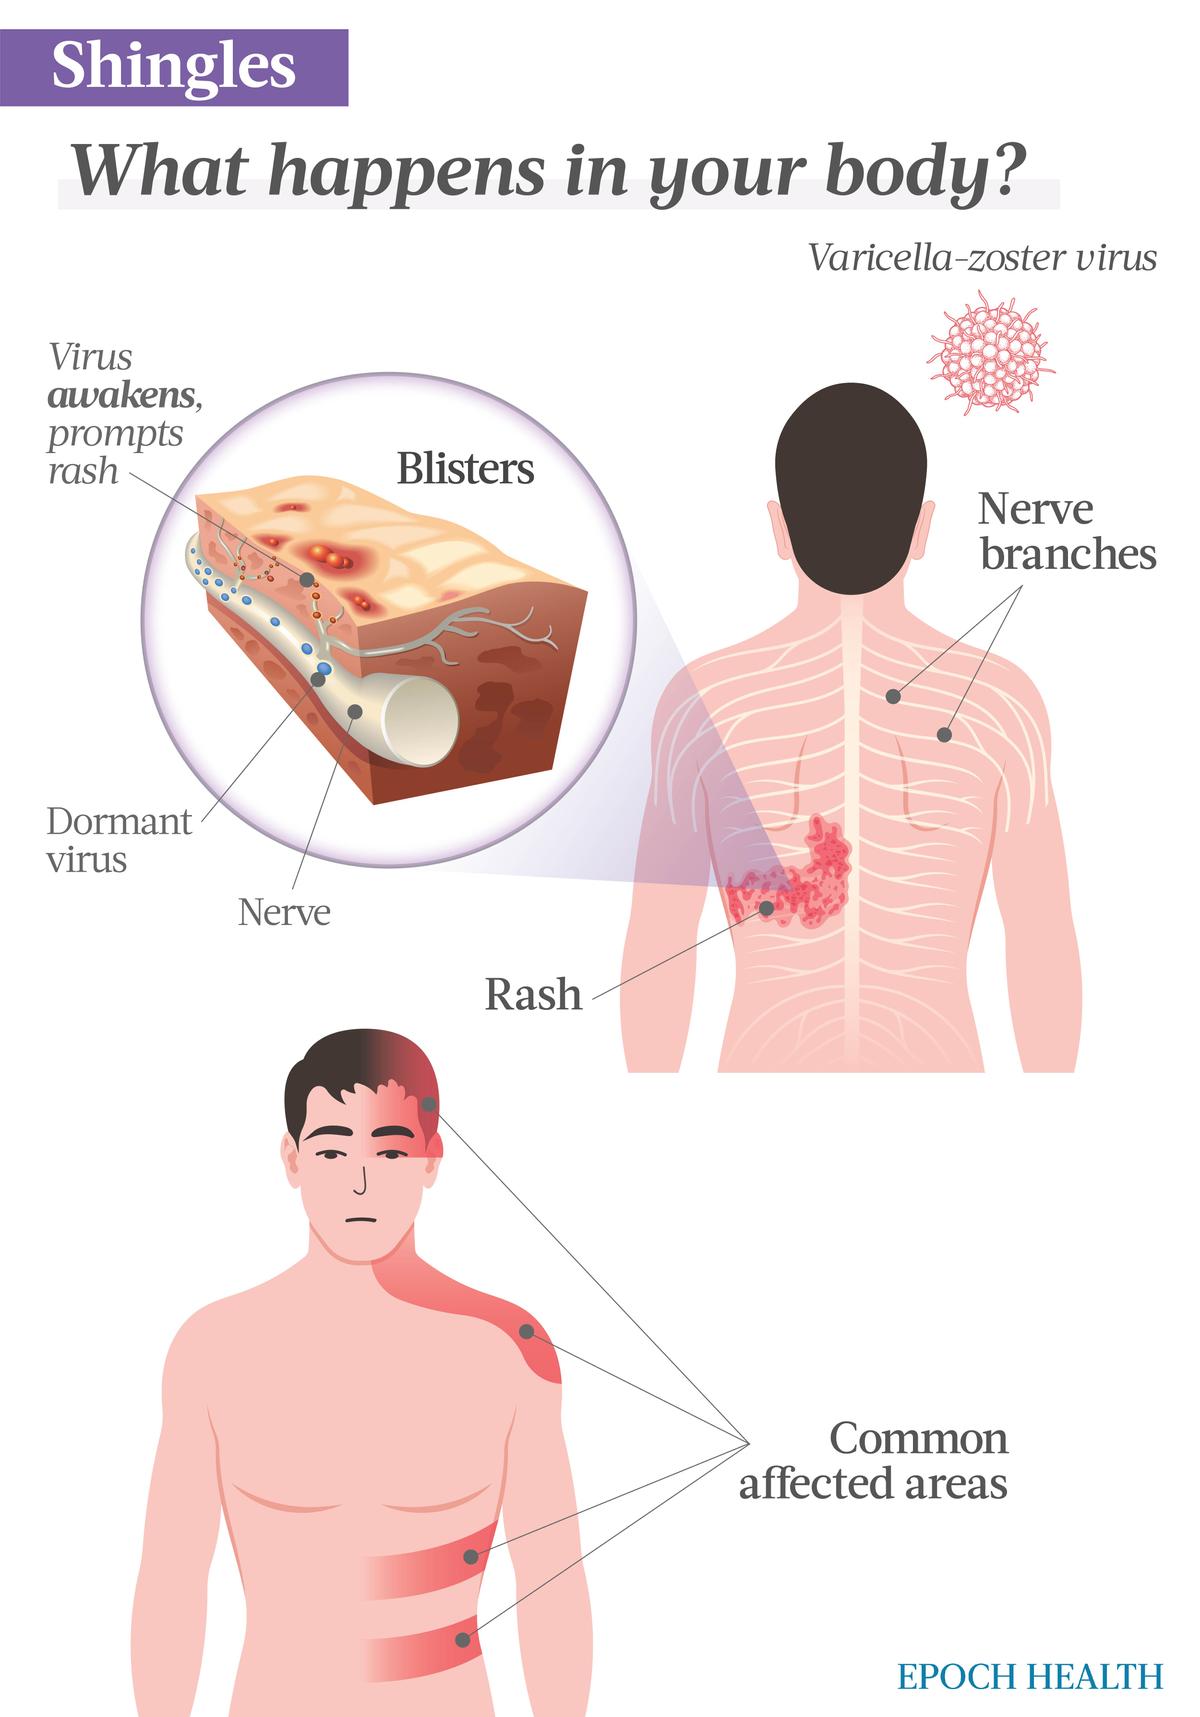  Shingles is caused by the chickenpox virus that affects nerves. After one develops chickenpox, the virus remains dormant in the body and may reactivate due to a weakened immune system. If it reactivates, it results in shingles. (Illustrations by The Epoch Times, Shutterstock)